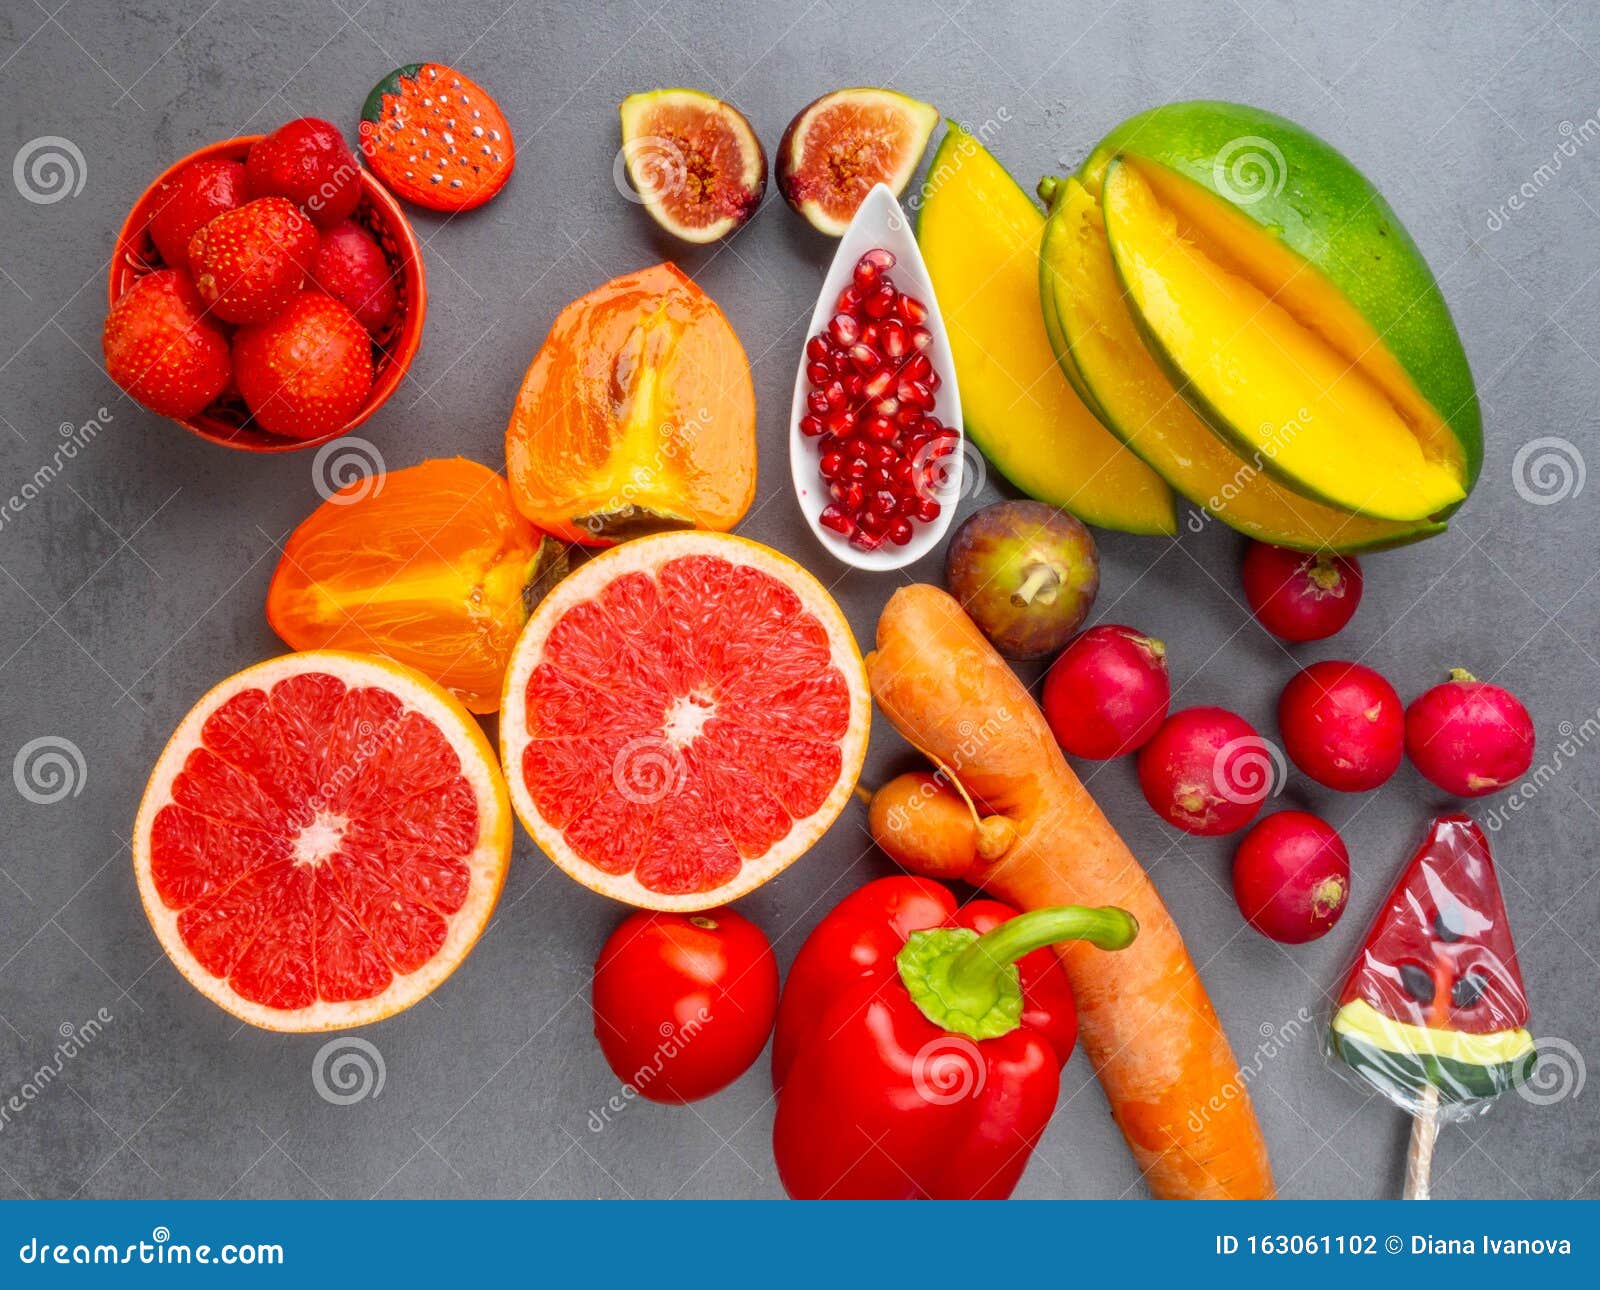 Close Up of Bright Red, Orange Healthy Fruits and Vegetables Products ...